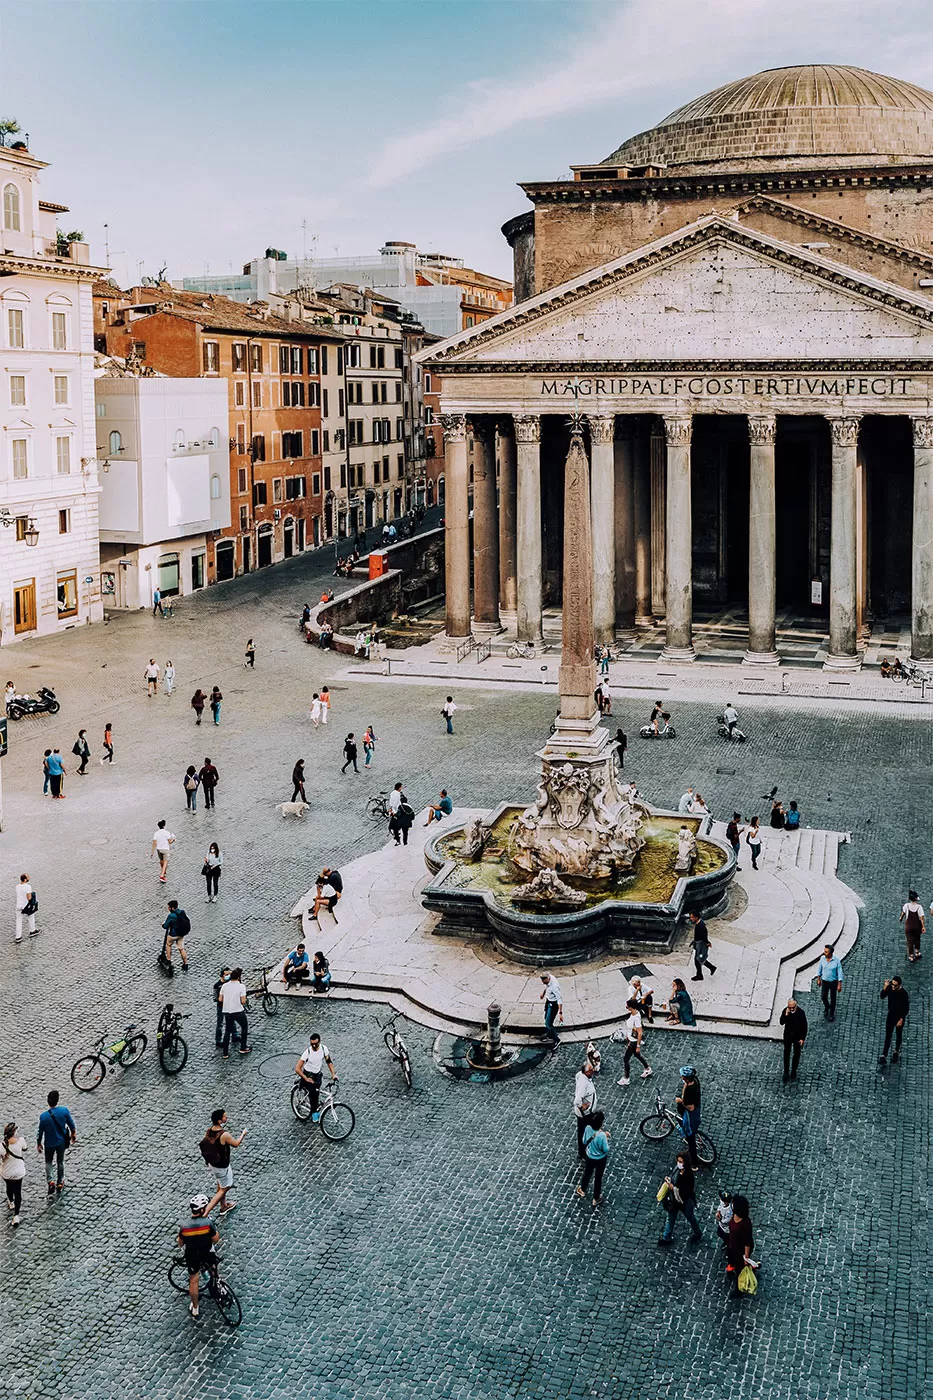 Top Hotels near the Pantheon in Rome -Overlooking the Pantheon